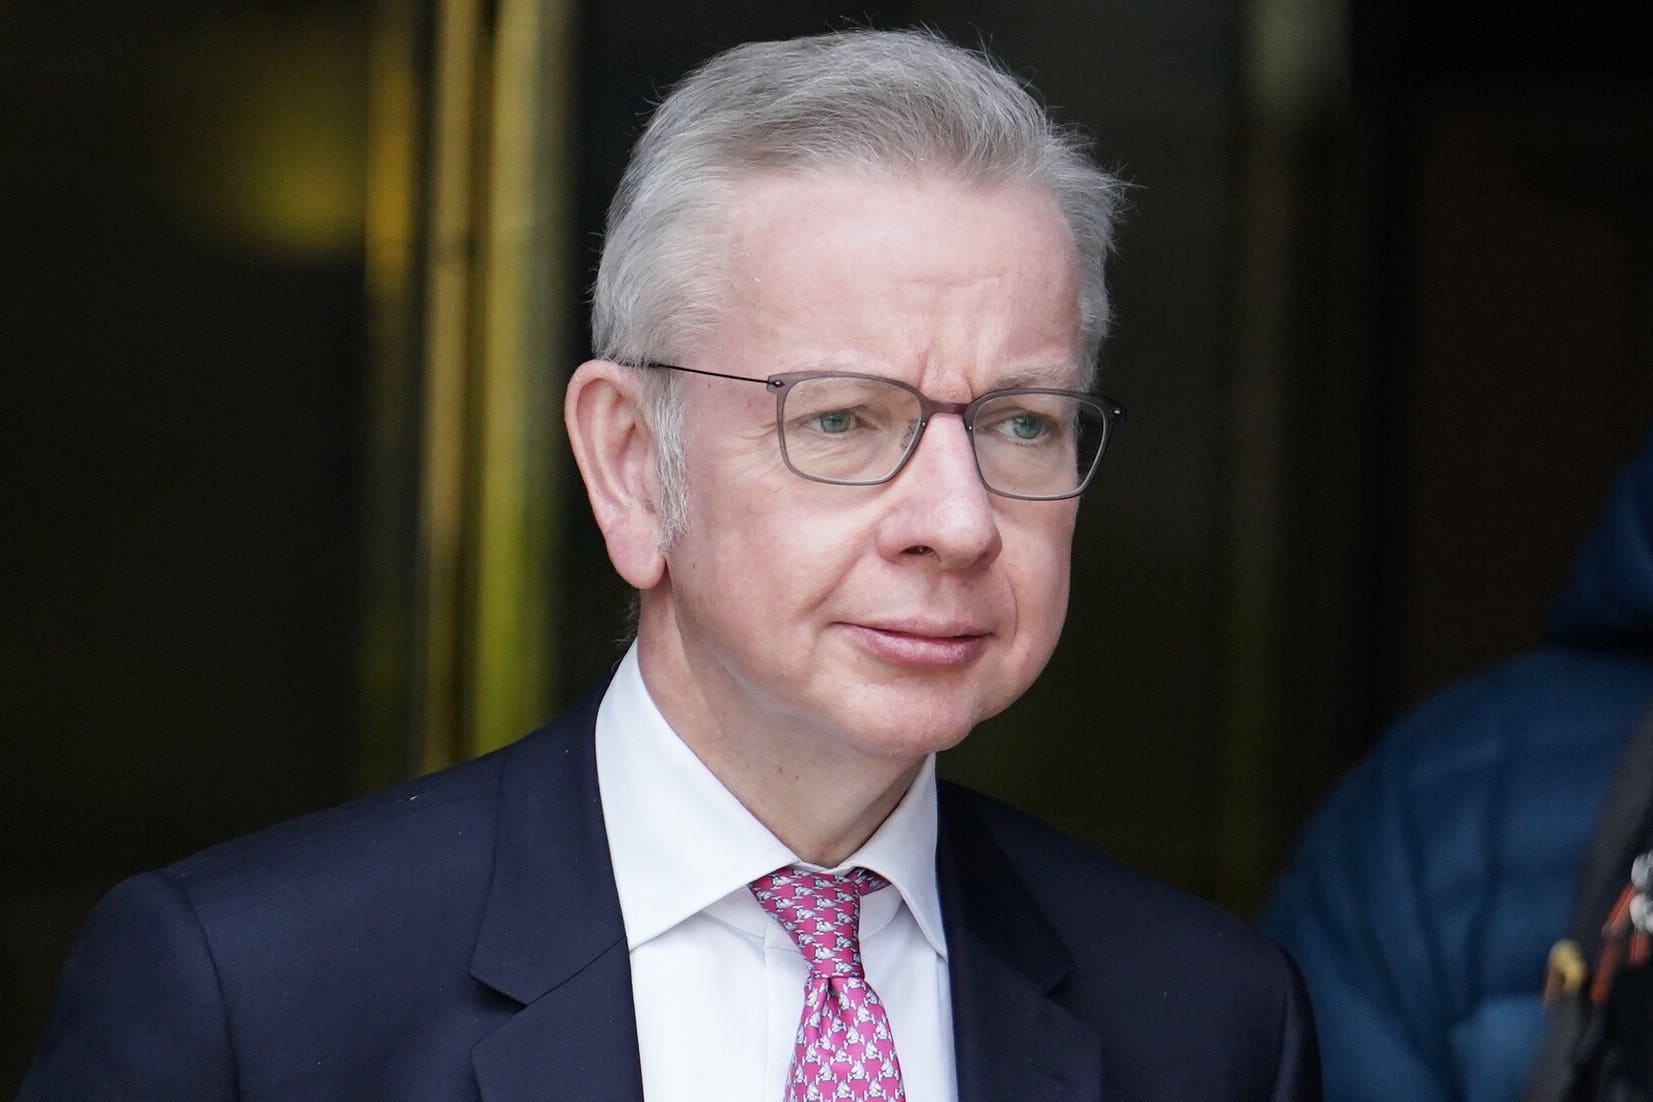 Housing secretary Michael Gove has insisted Section 21 notices will be ‘outlawed’ before the next general election